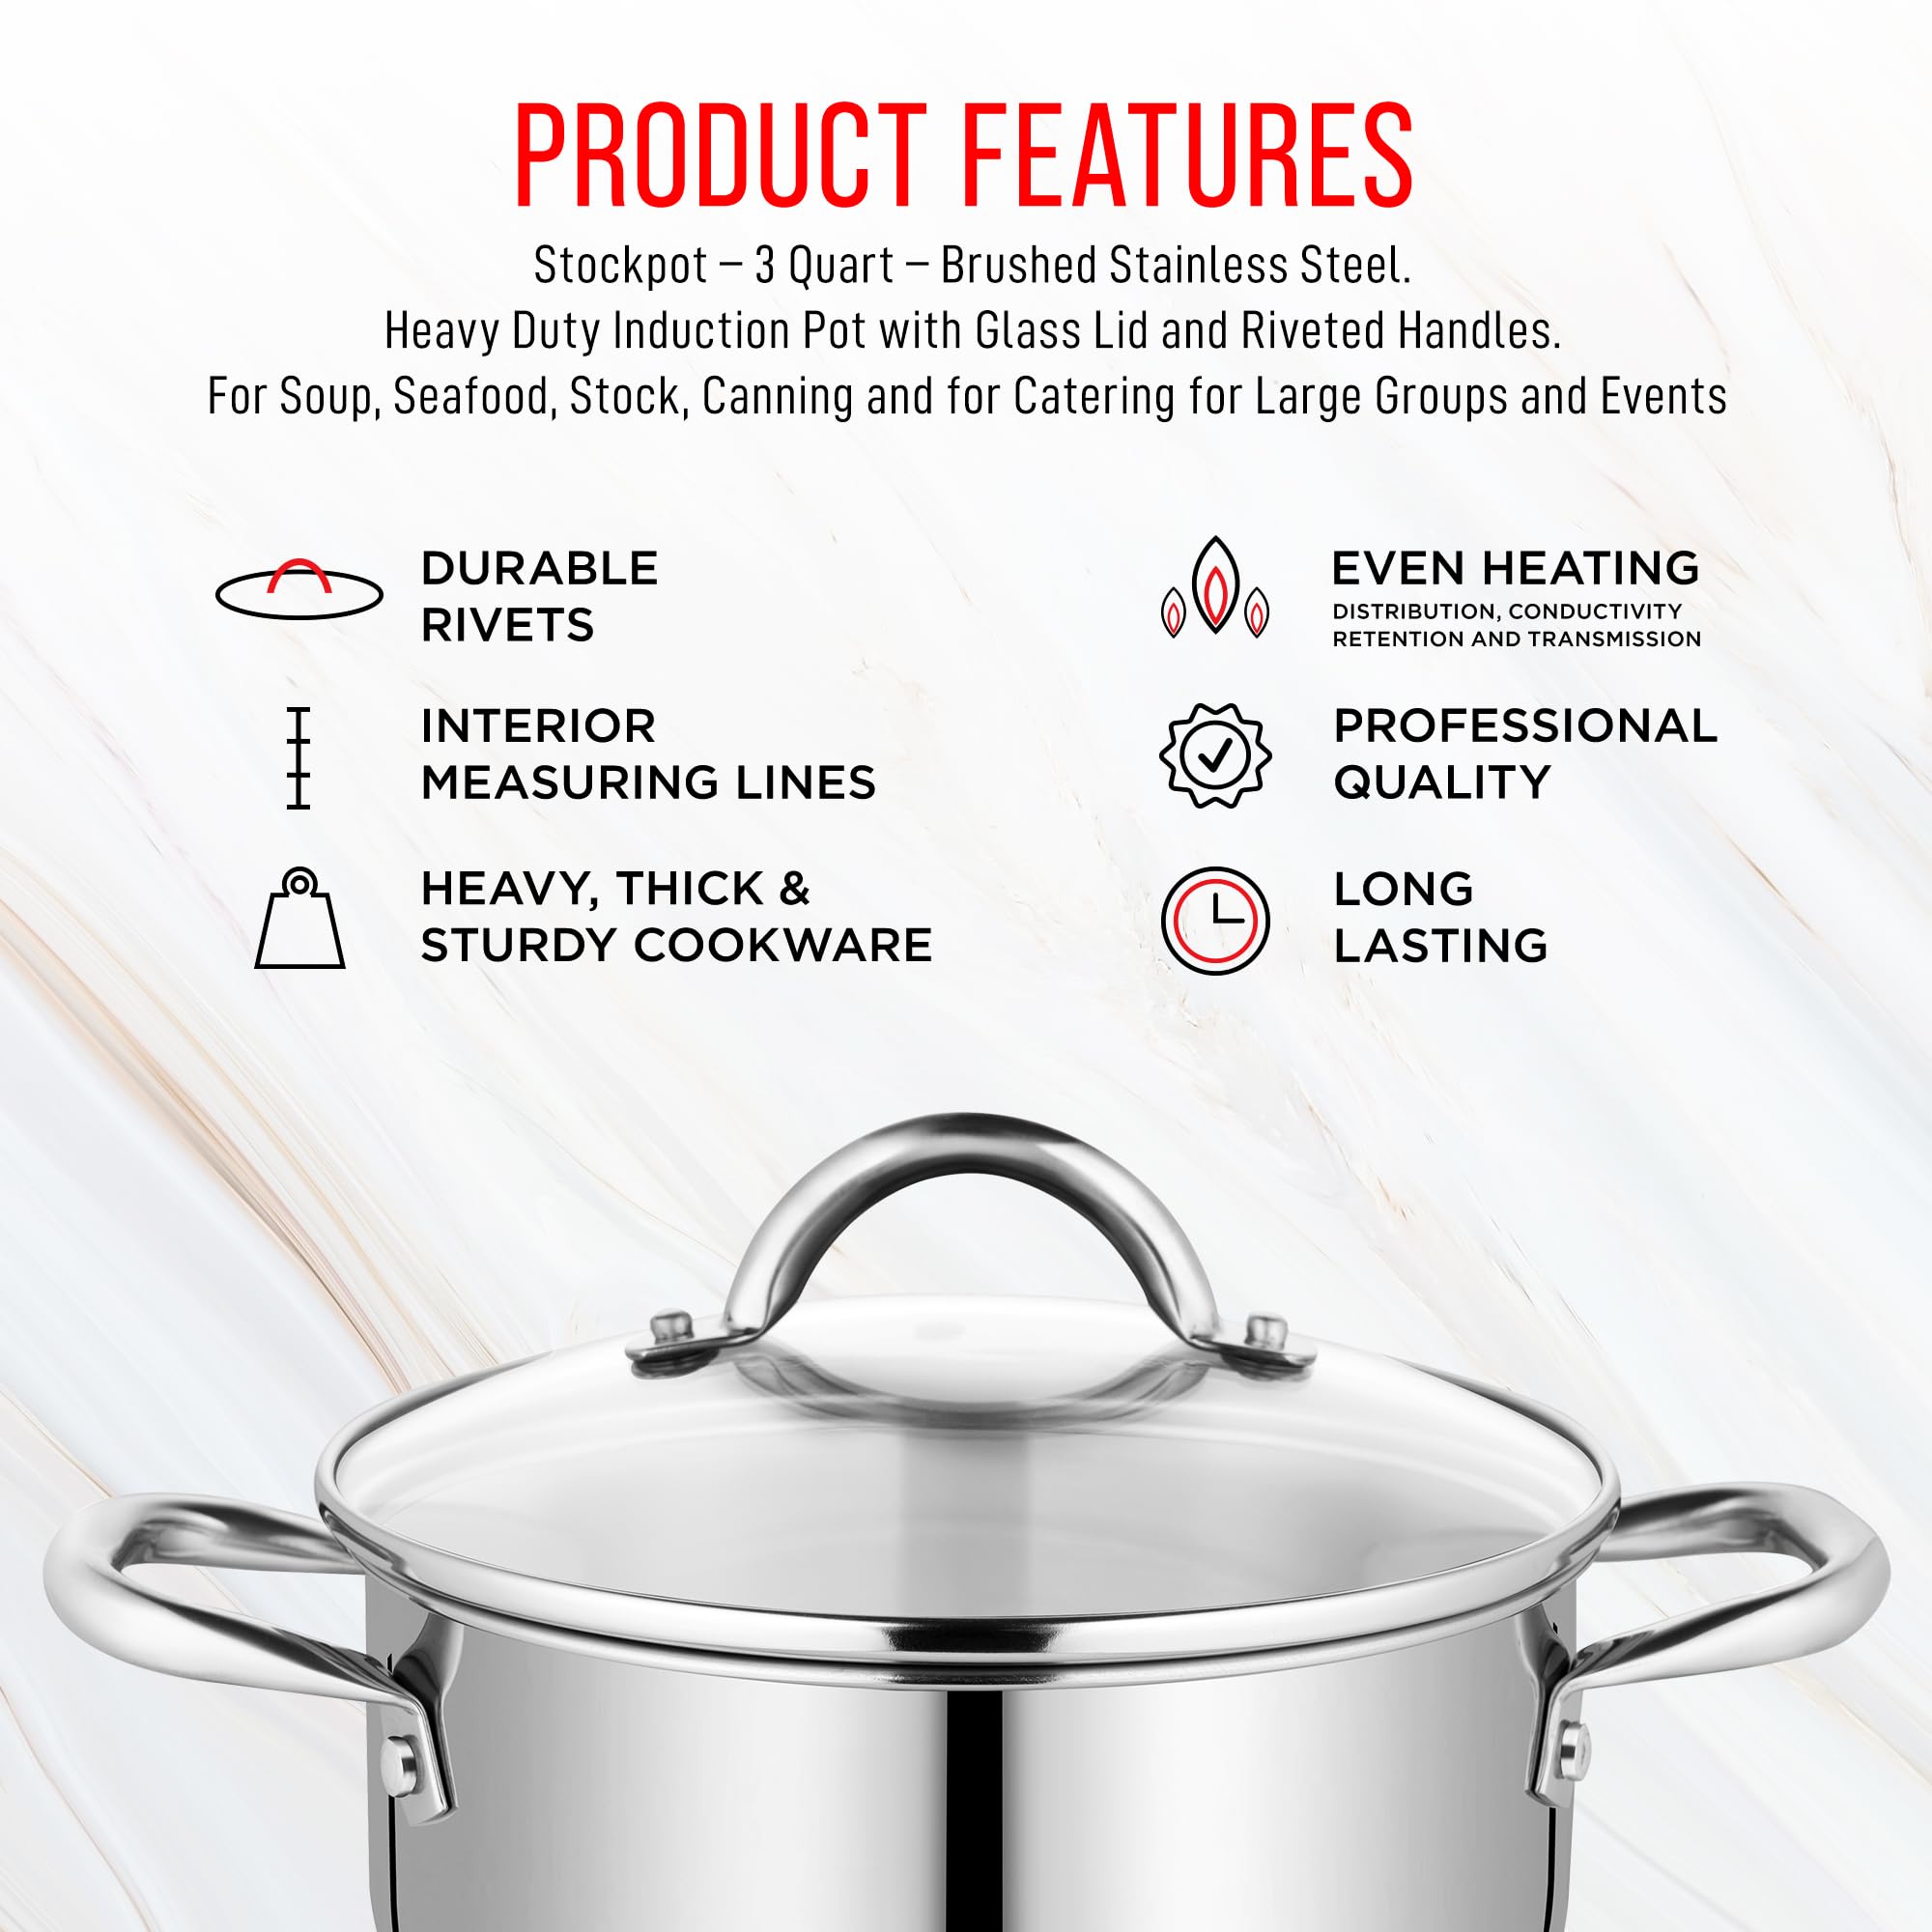 Bakken-Swiss Deluxe 3-Quart Stainless Steel Stockpot w/Tempered Glass See-Through Lid - Simmering Delicious Soups Stews & Induction Cooking - Exceptional Heat Distribution - Heavy-Duty & Food-Grade